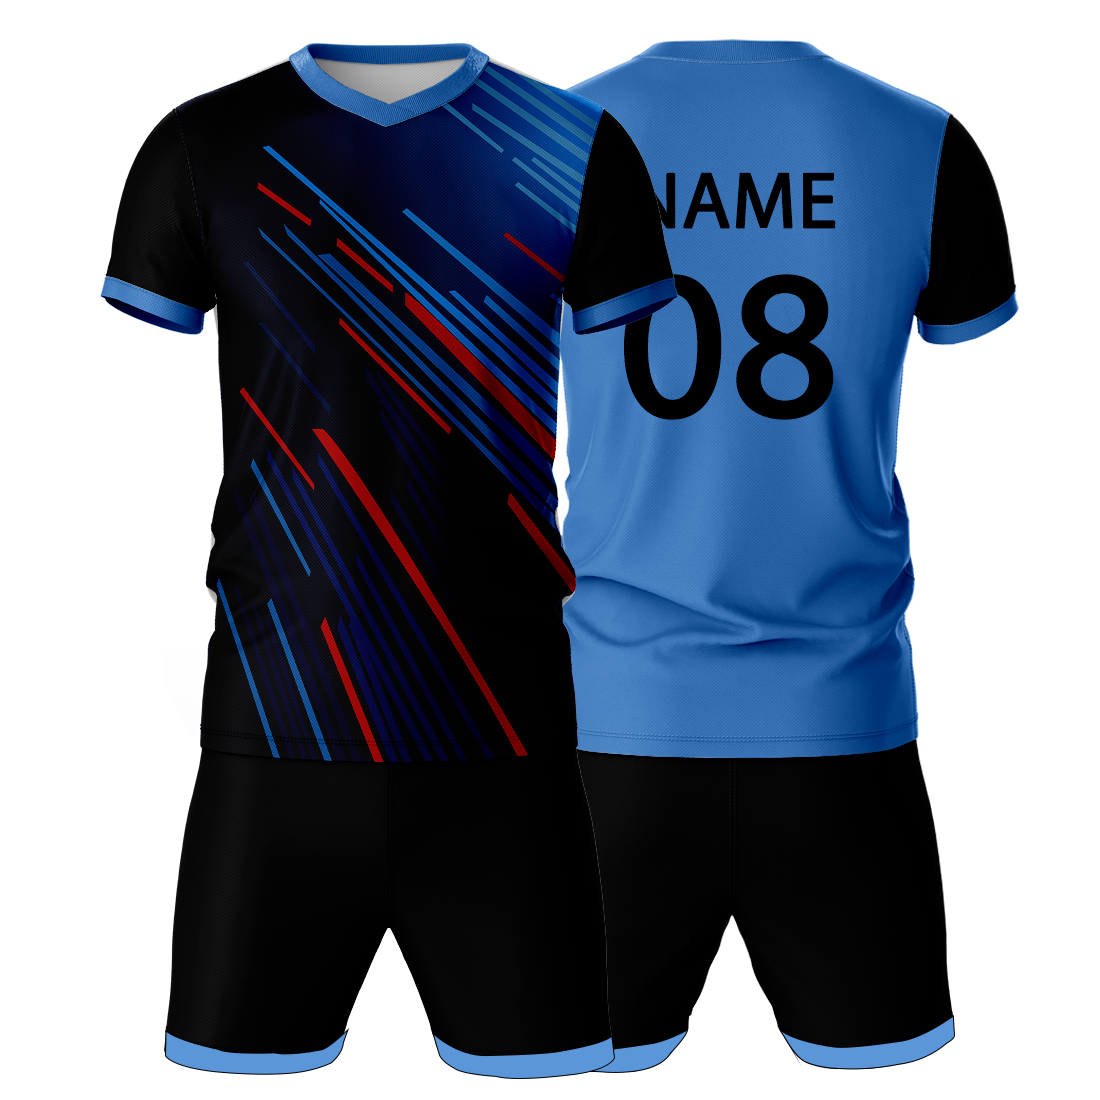 All Over Printed Jersey With Shorts Name & Number Printed.NP50000654